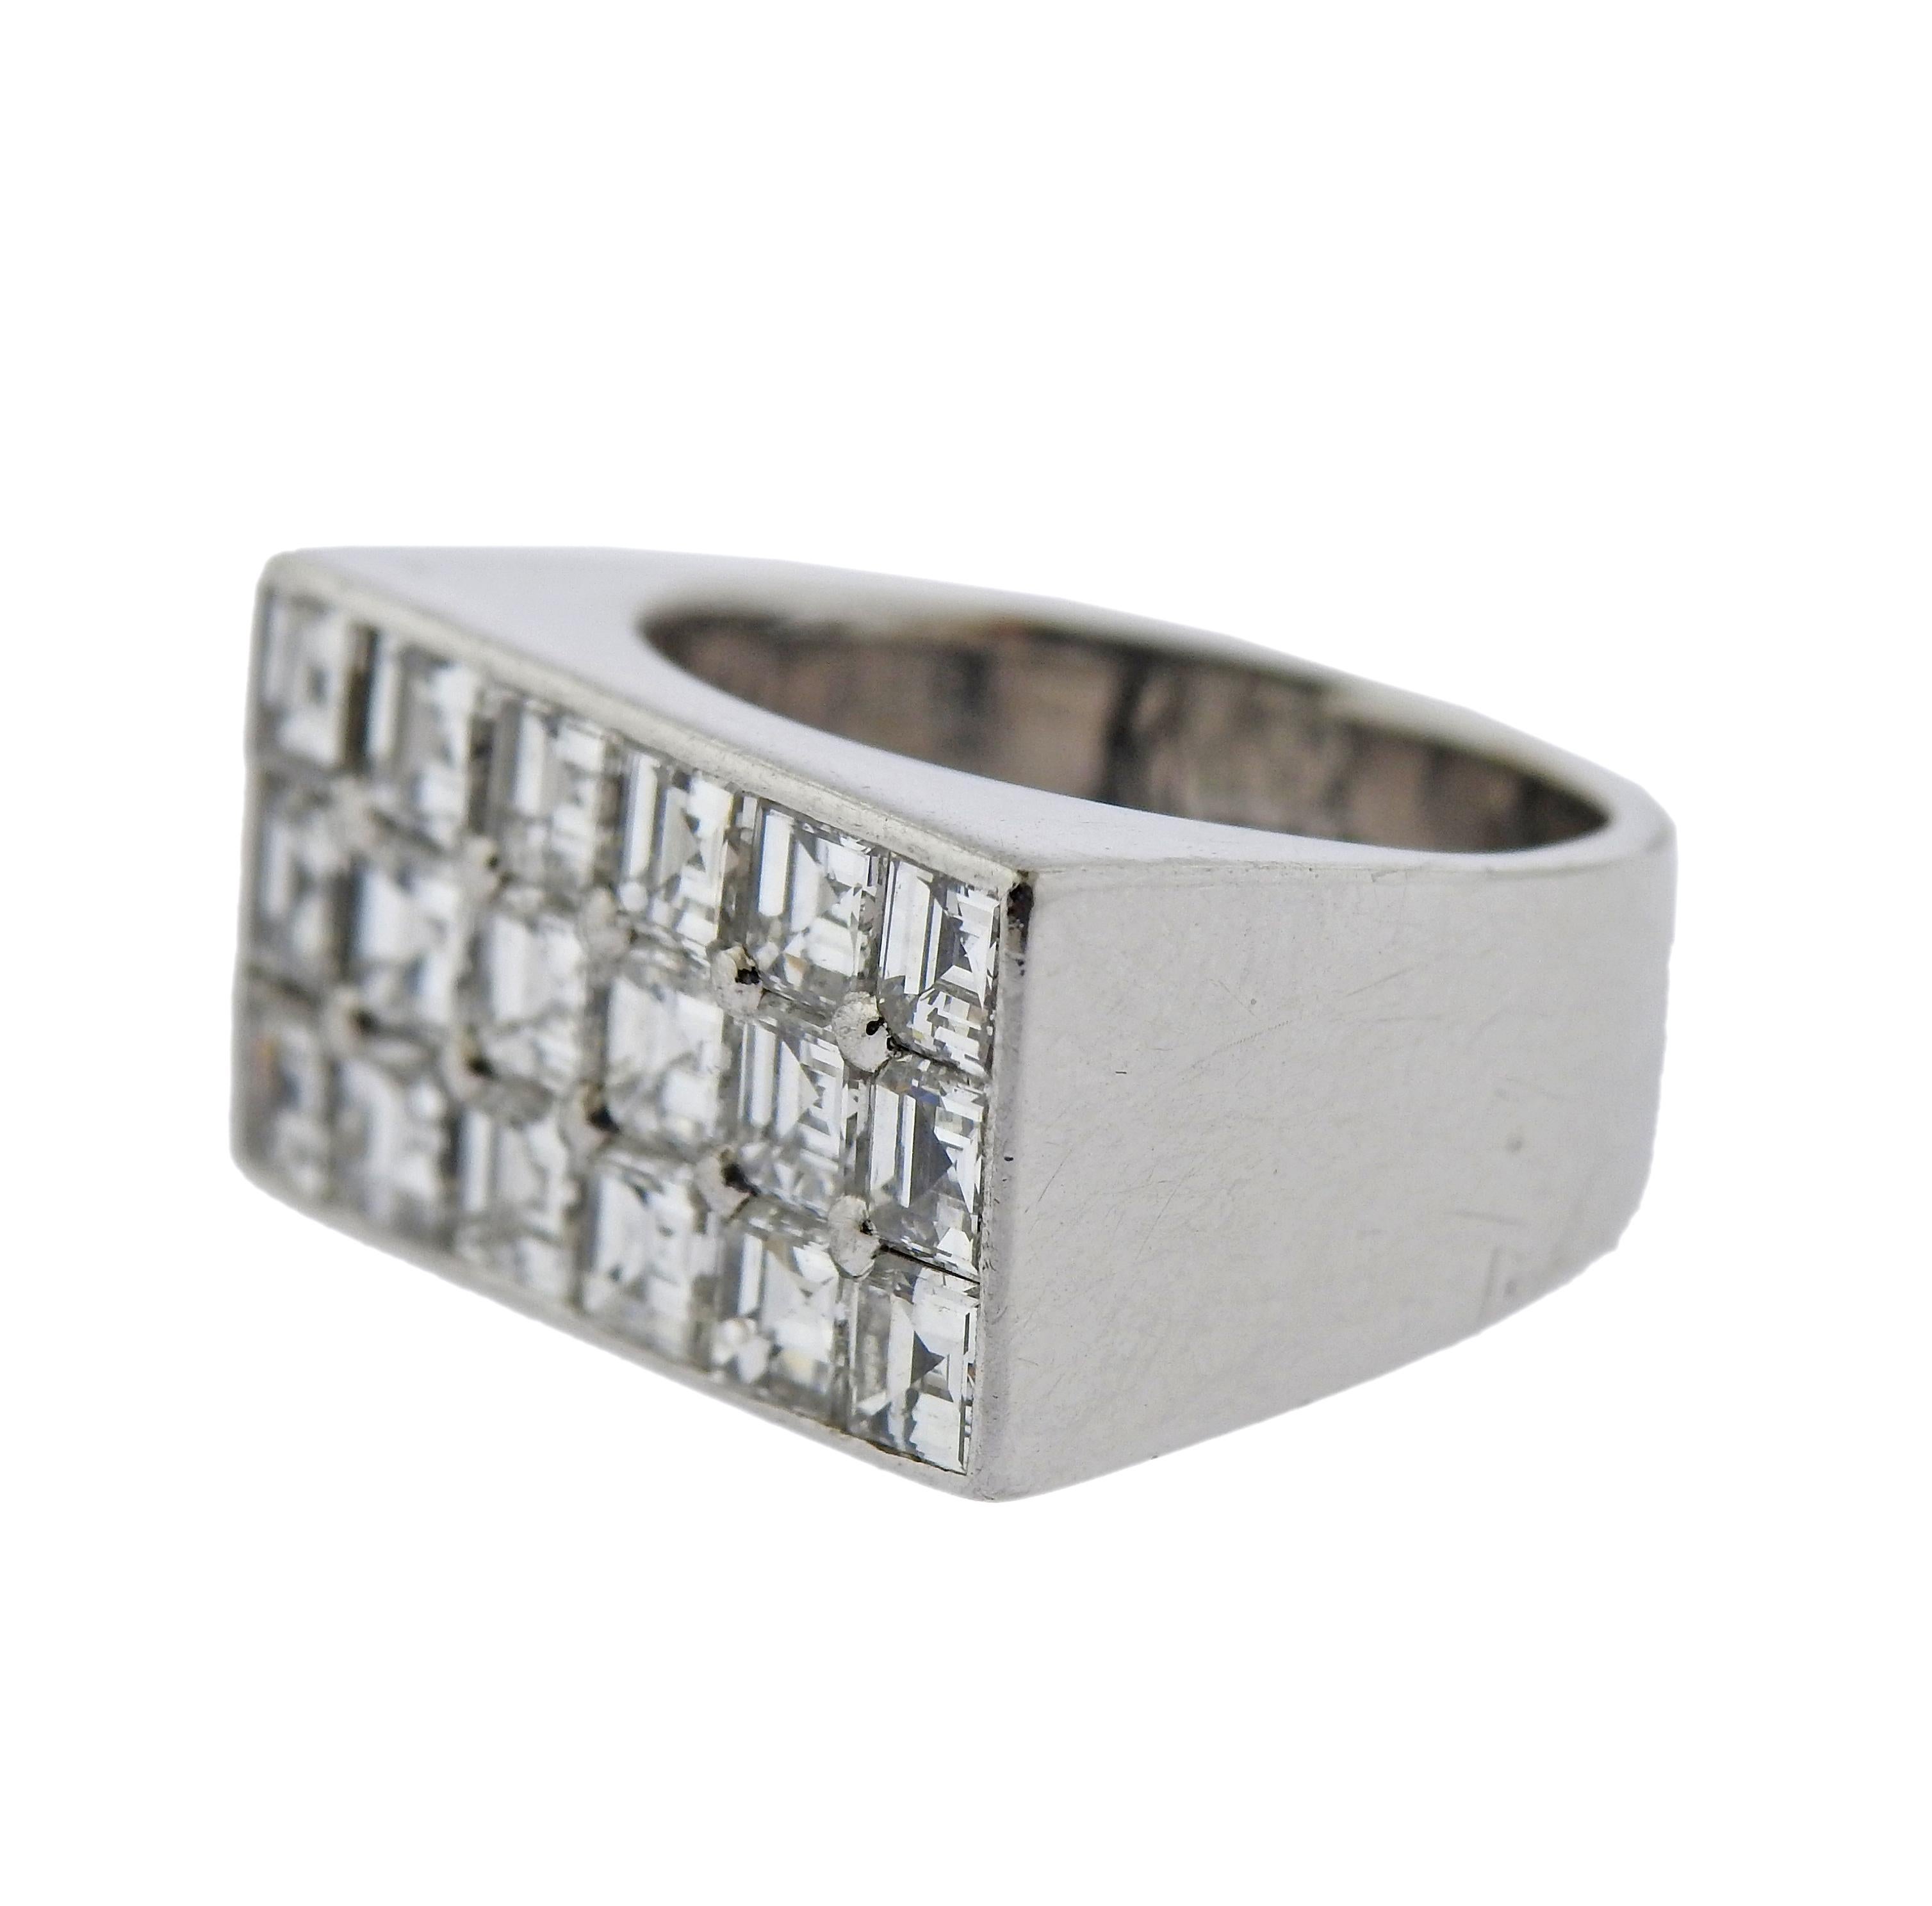 Cartier London 18k white gold ring, with three rows of diamonds - total approx. 3.00ctw. Ring size - 5.5, ring top - 11mm x 22mm. Marked with English  punch marks, Cartier. Weight - 15.3 grams.